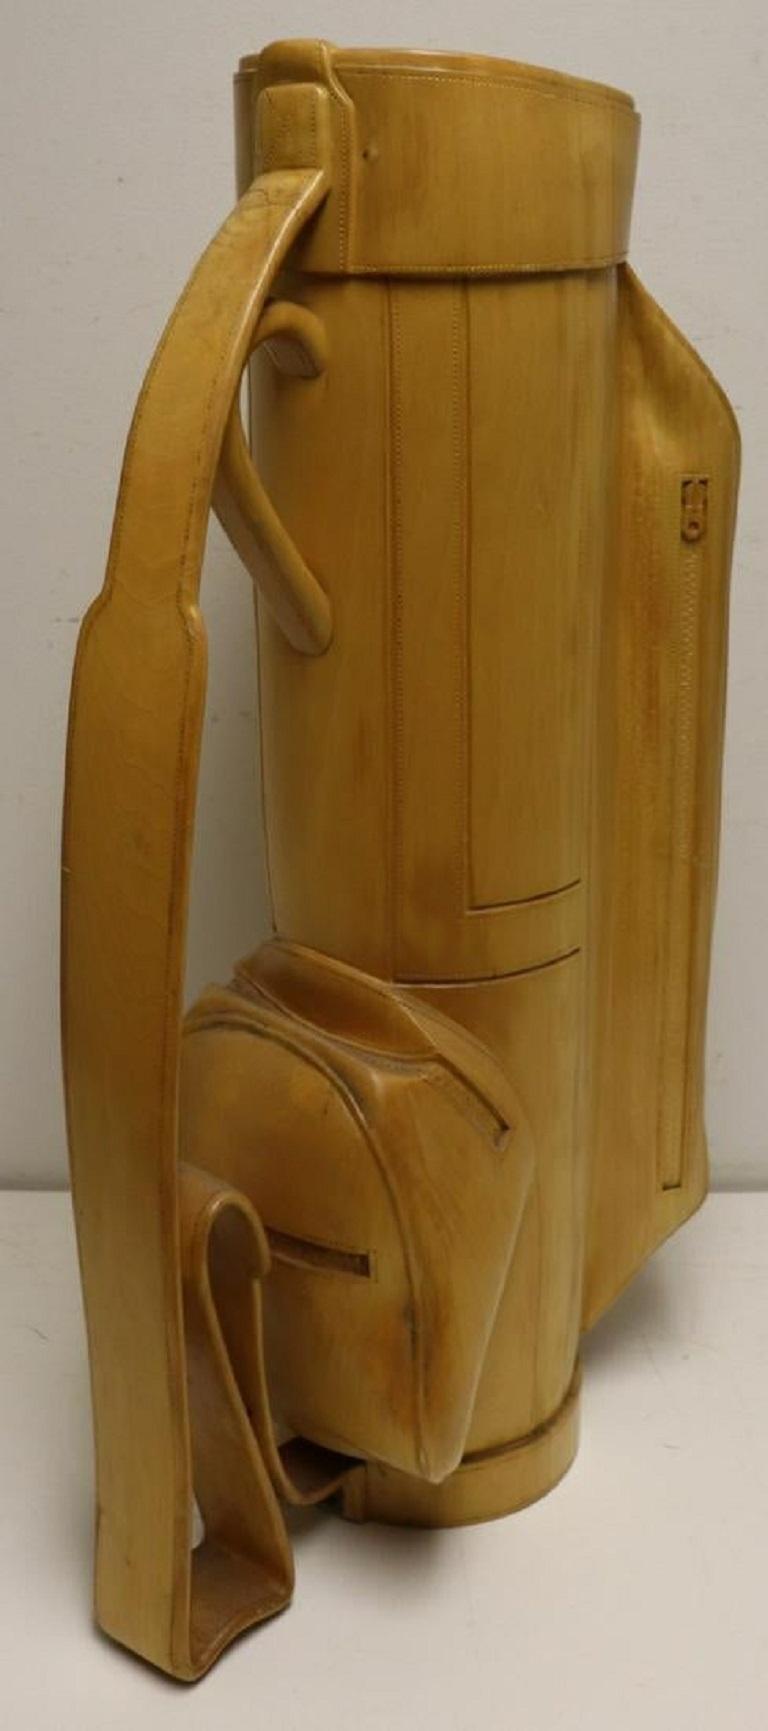 Heavily carved solid wood golf bag. Custom made and one of a kind. Nice item for a collector or golf enthusiast. Has a metal insert inside.